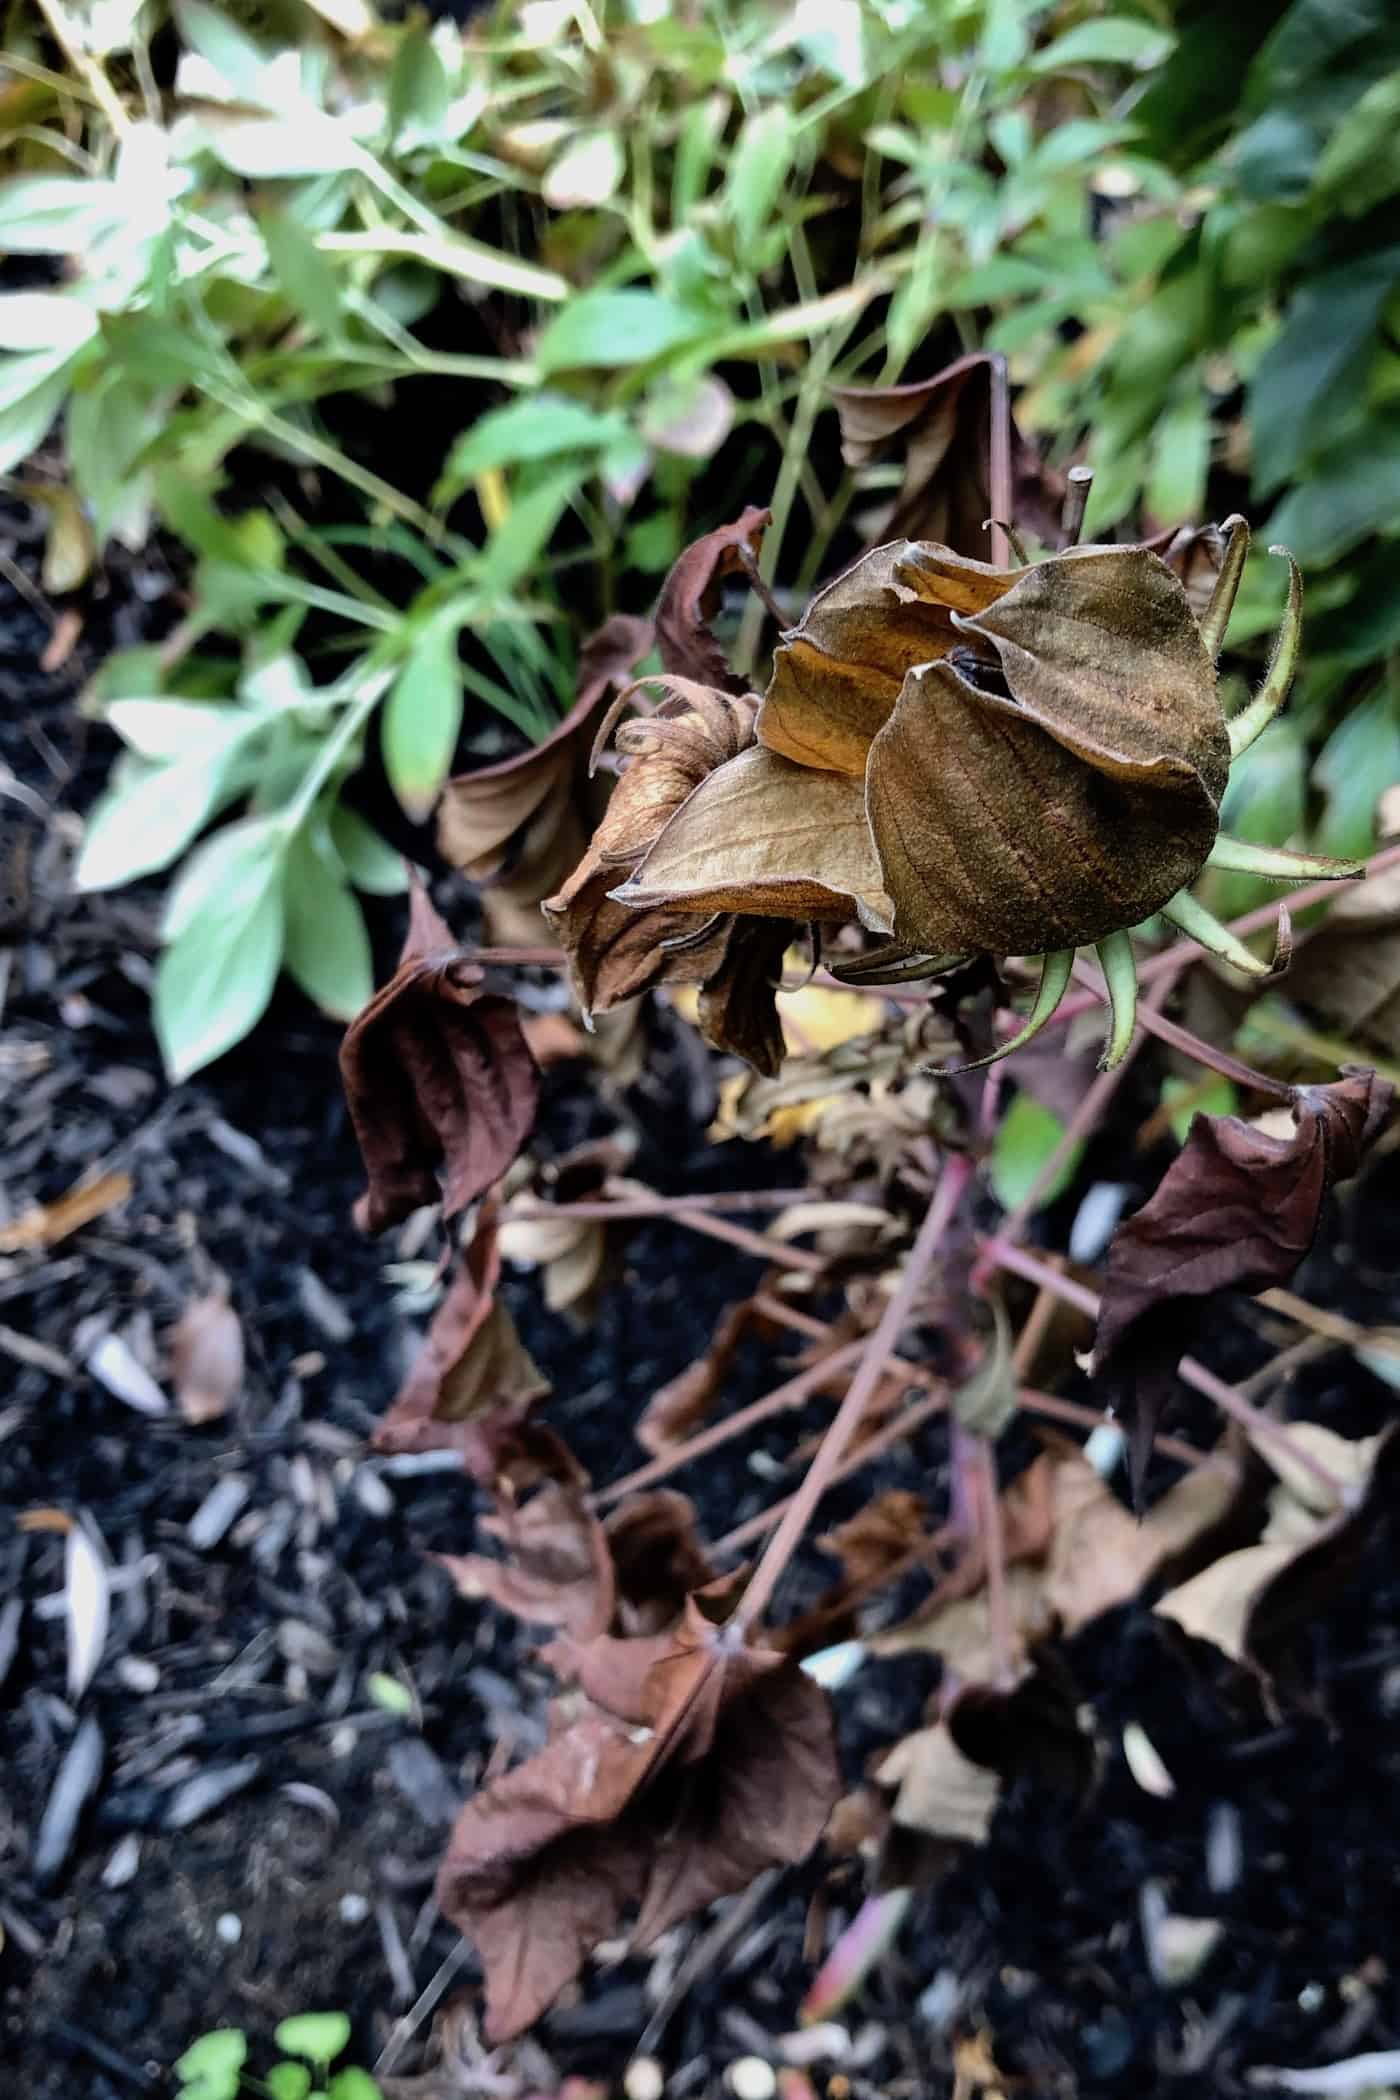 Dead foliage on hardy hibiscus (herbaceous perennial plant)